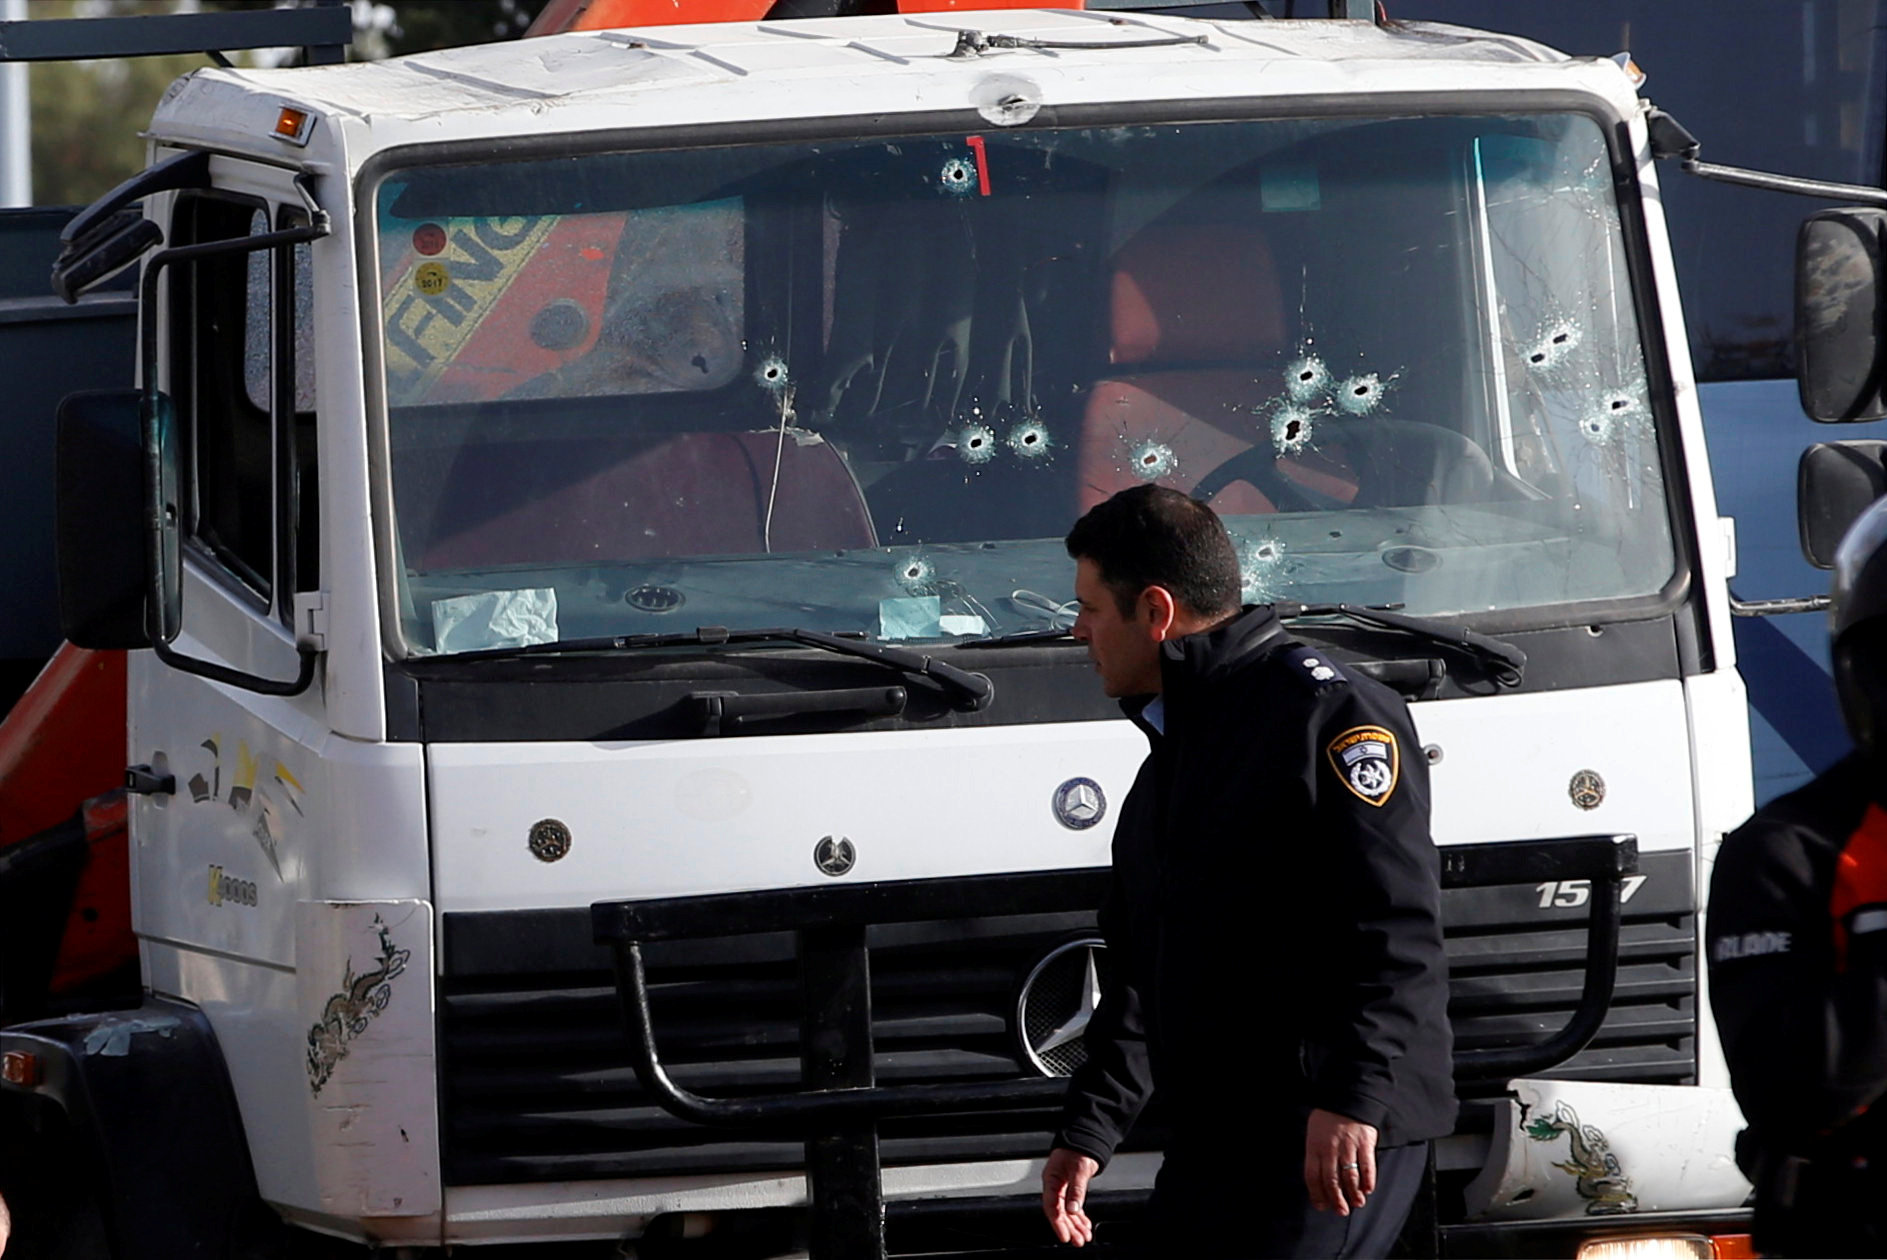 At least four dead in Palestinian truck attack in Jerusalem